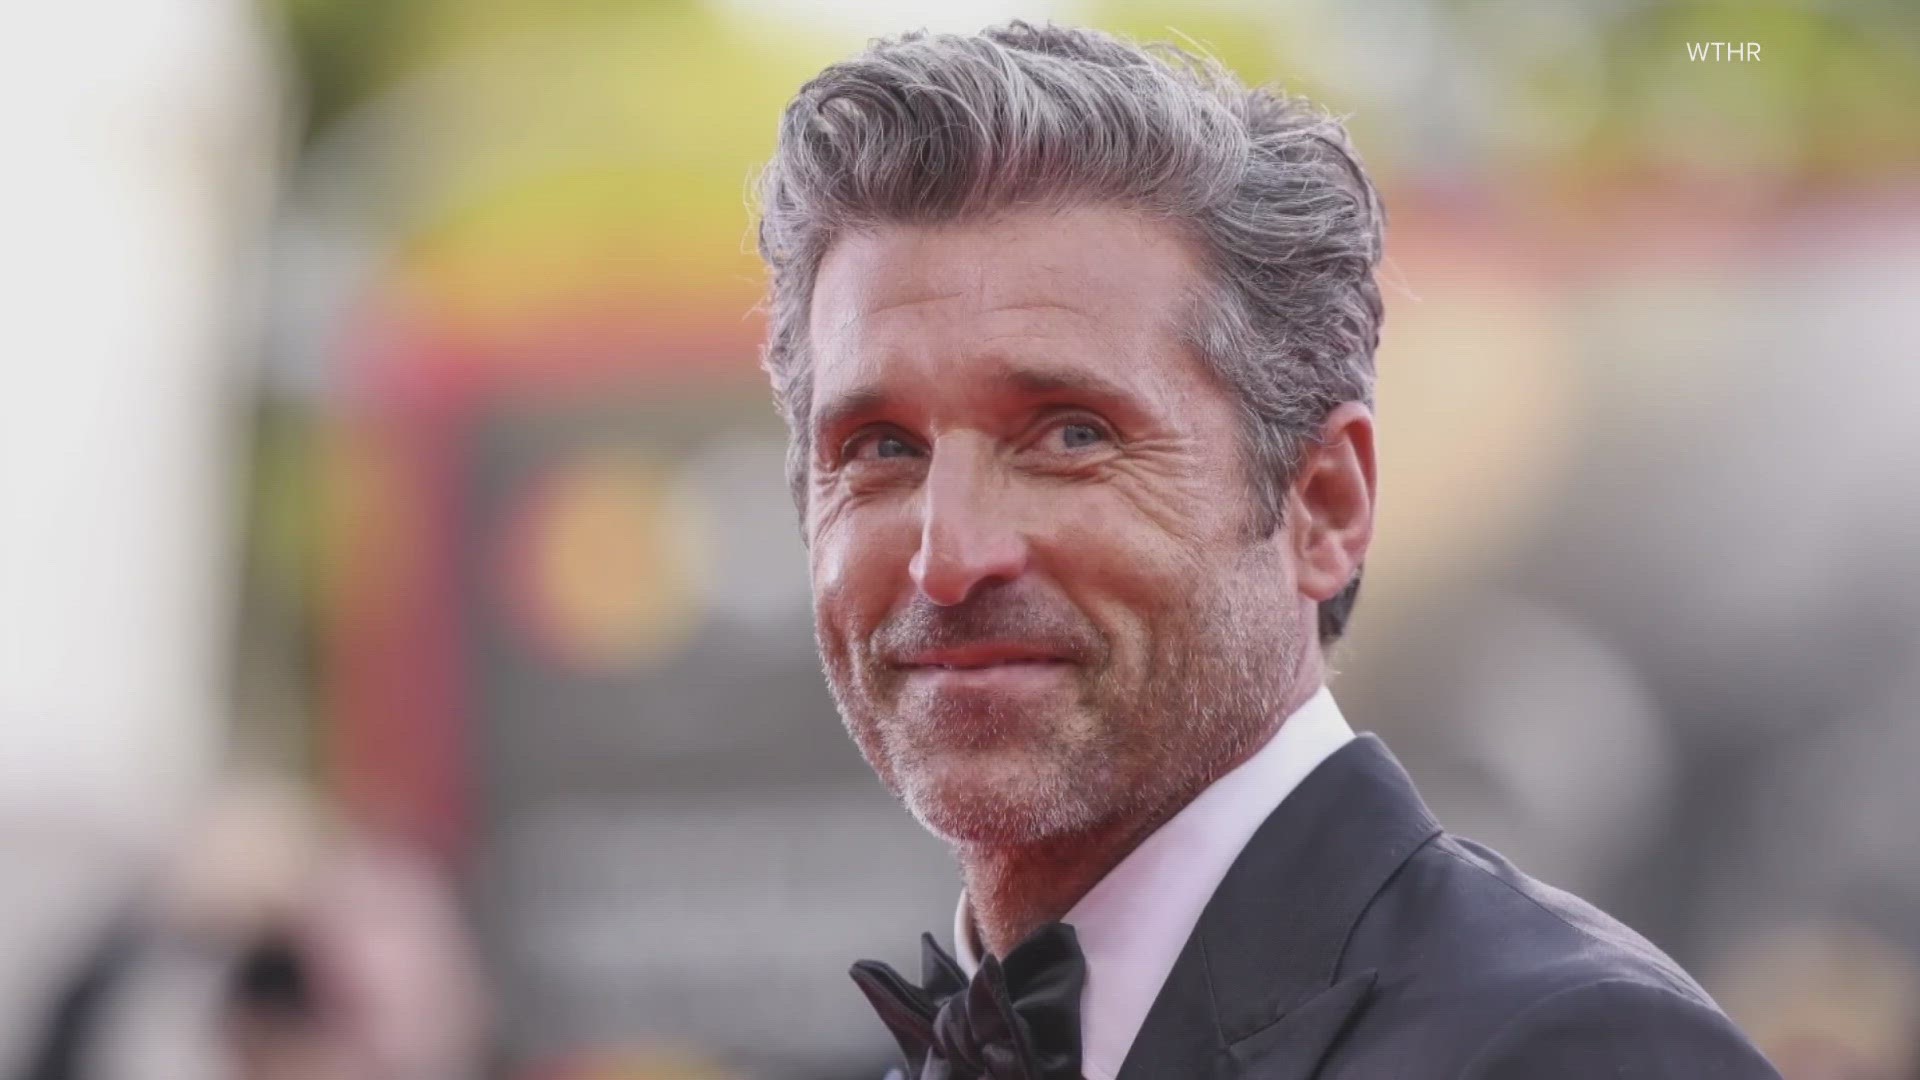 Patrick Dempsey rose to fame with roles like heartthrob Doctor Derek Shepherd on Grey's Anatomy.